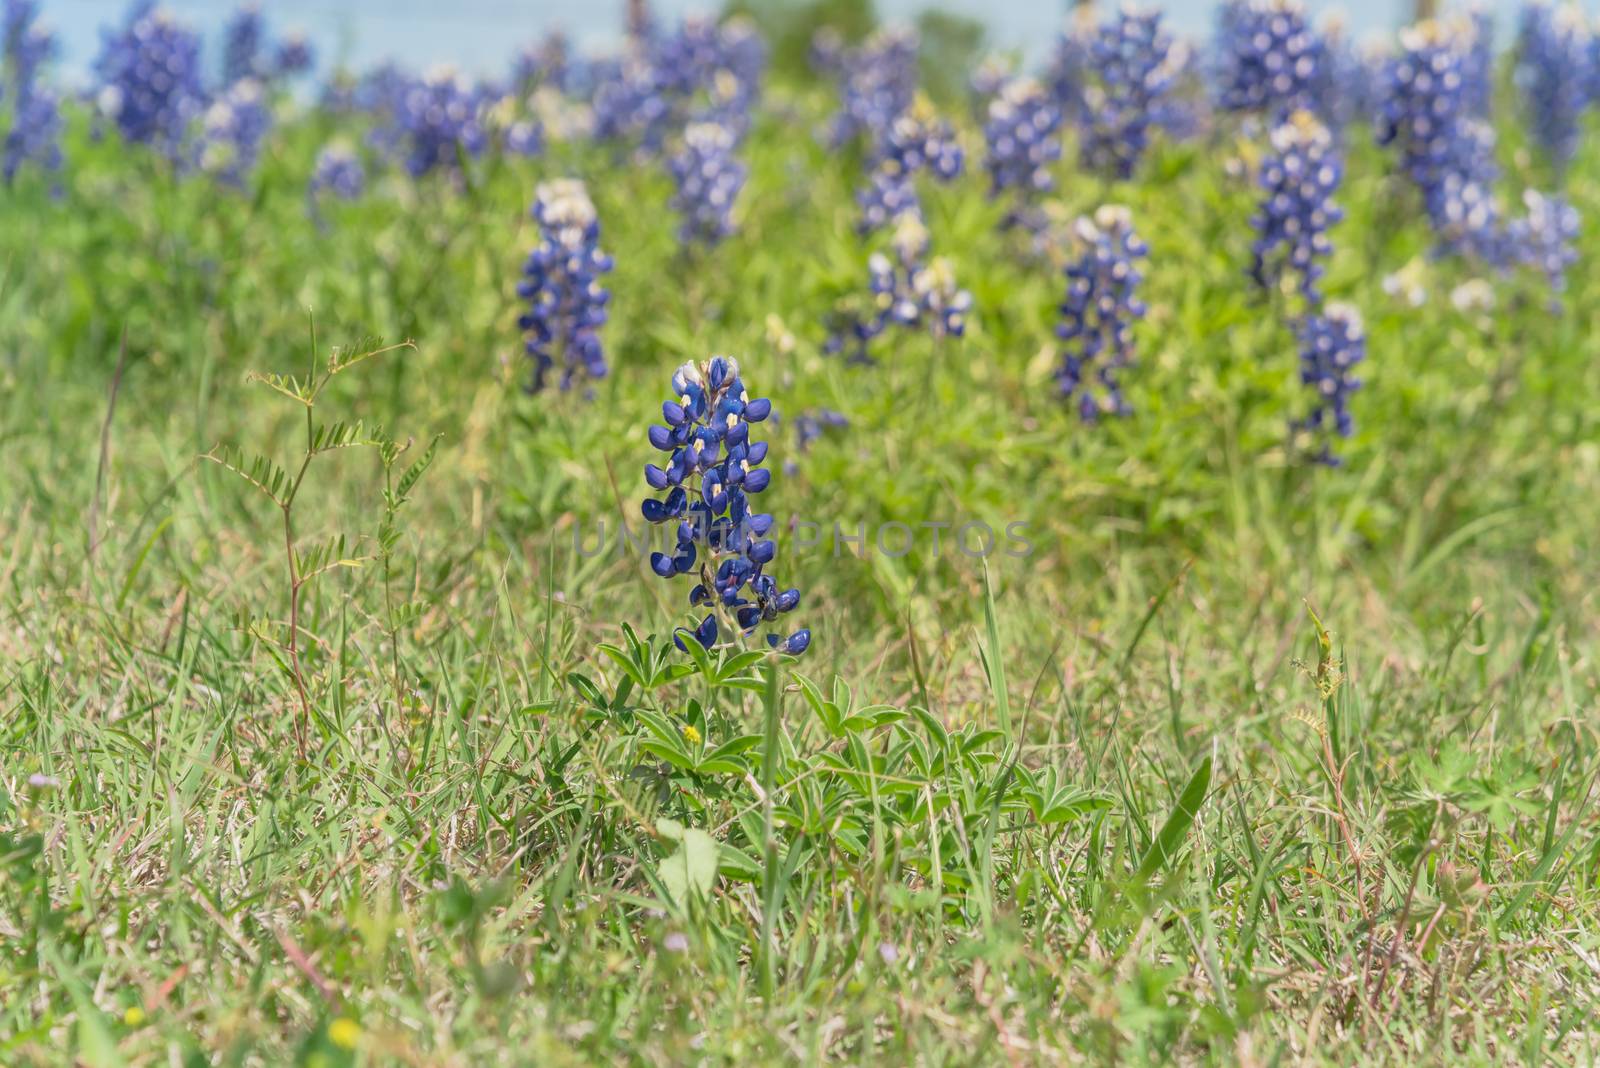 Selective focus of Bluebonnet wildflower blooming in countryside Bristol, Texas. Colorful state flower of Texas blossom in springtime